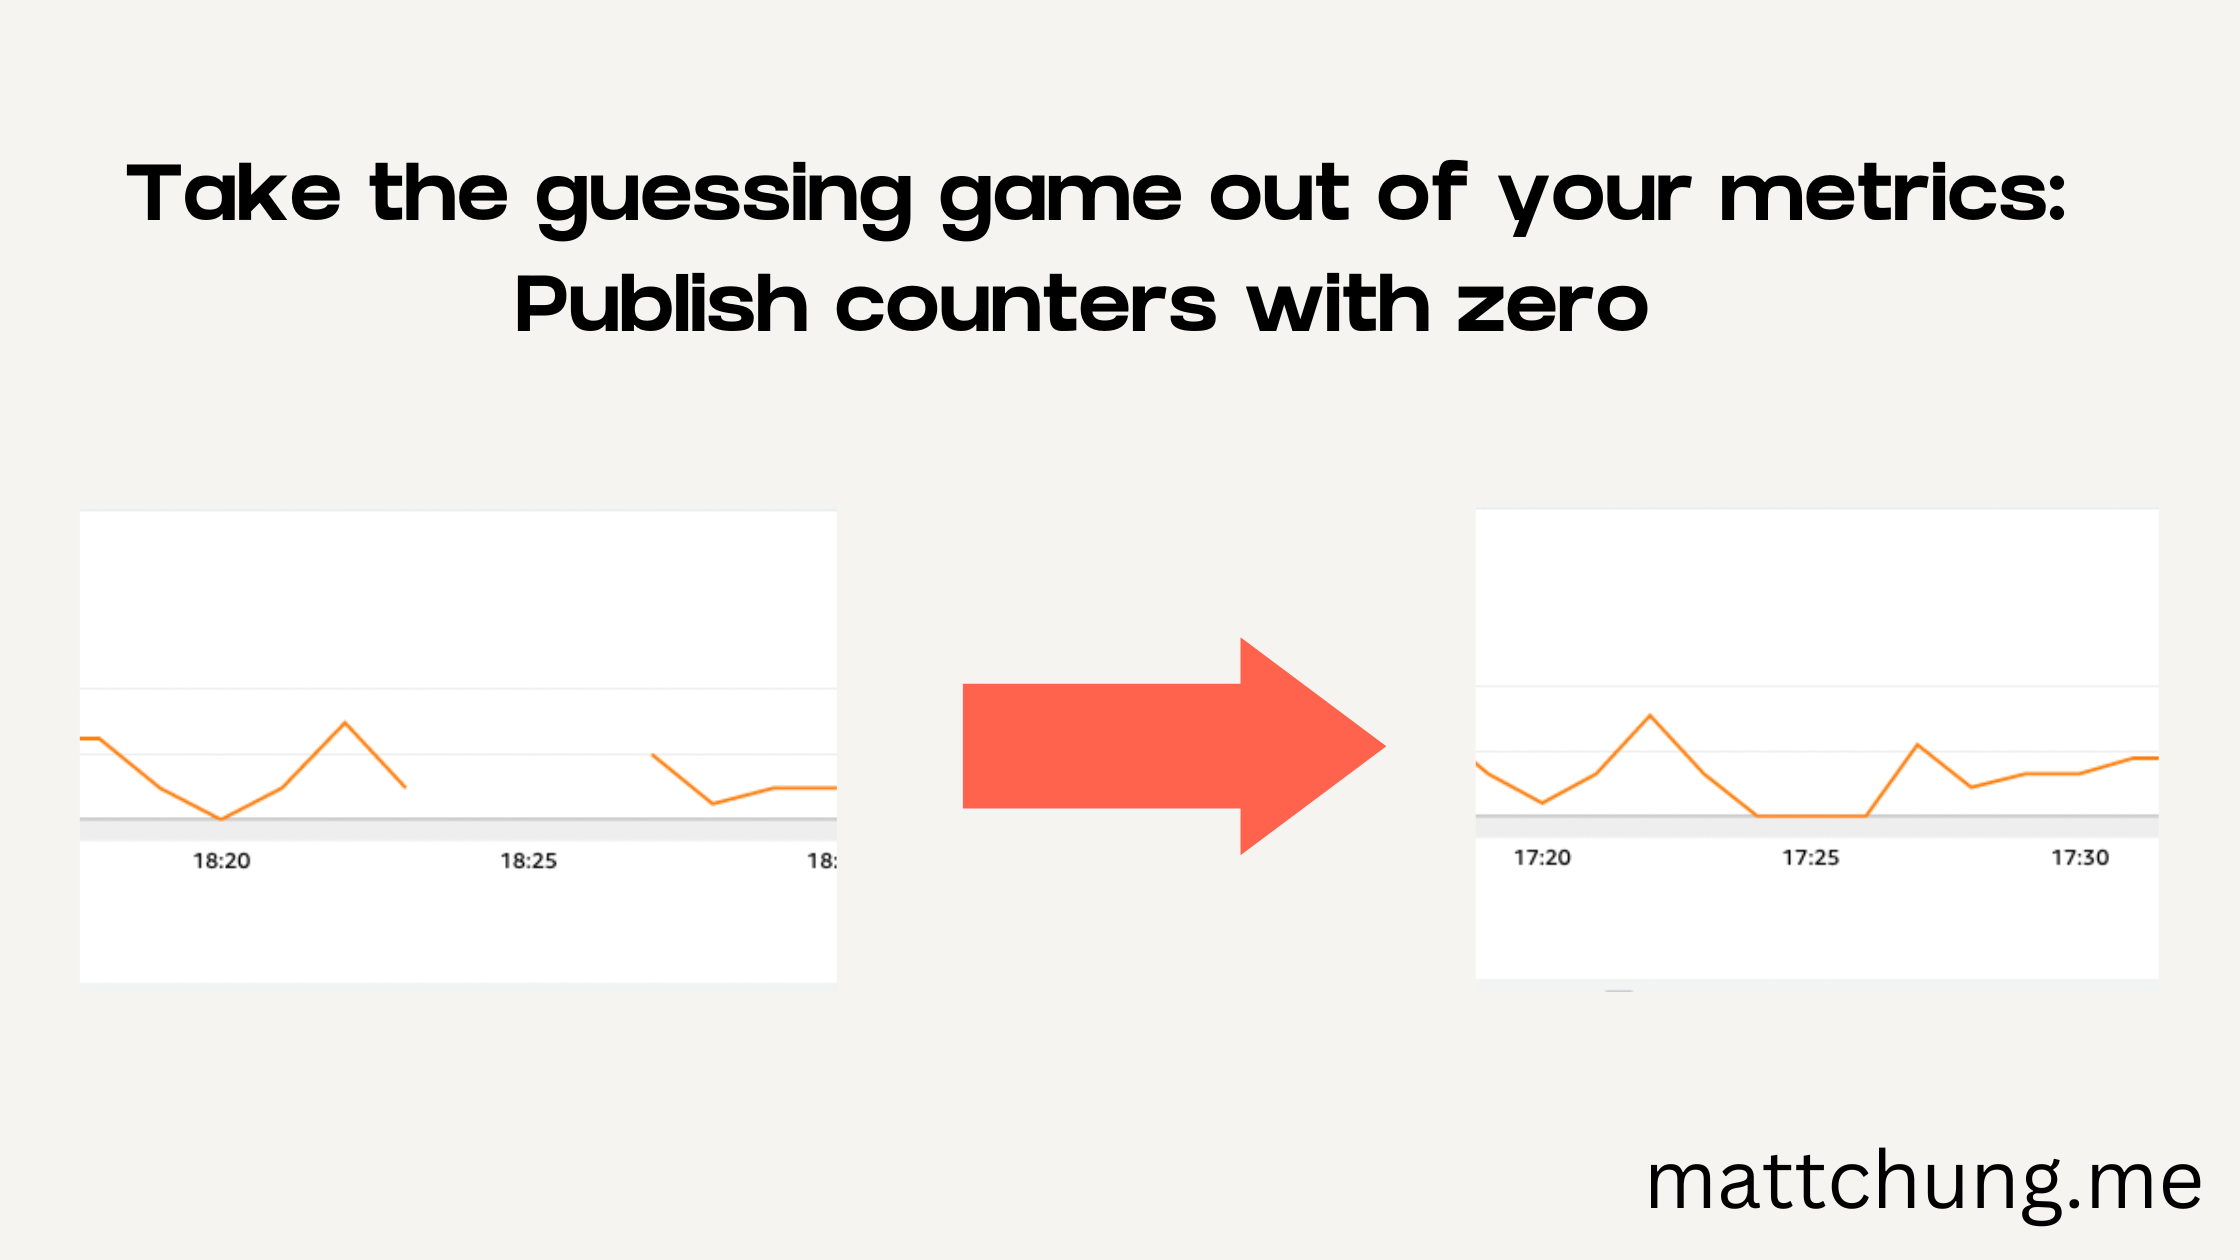 Take the guessing game out of your metrics publish counters with zero values